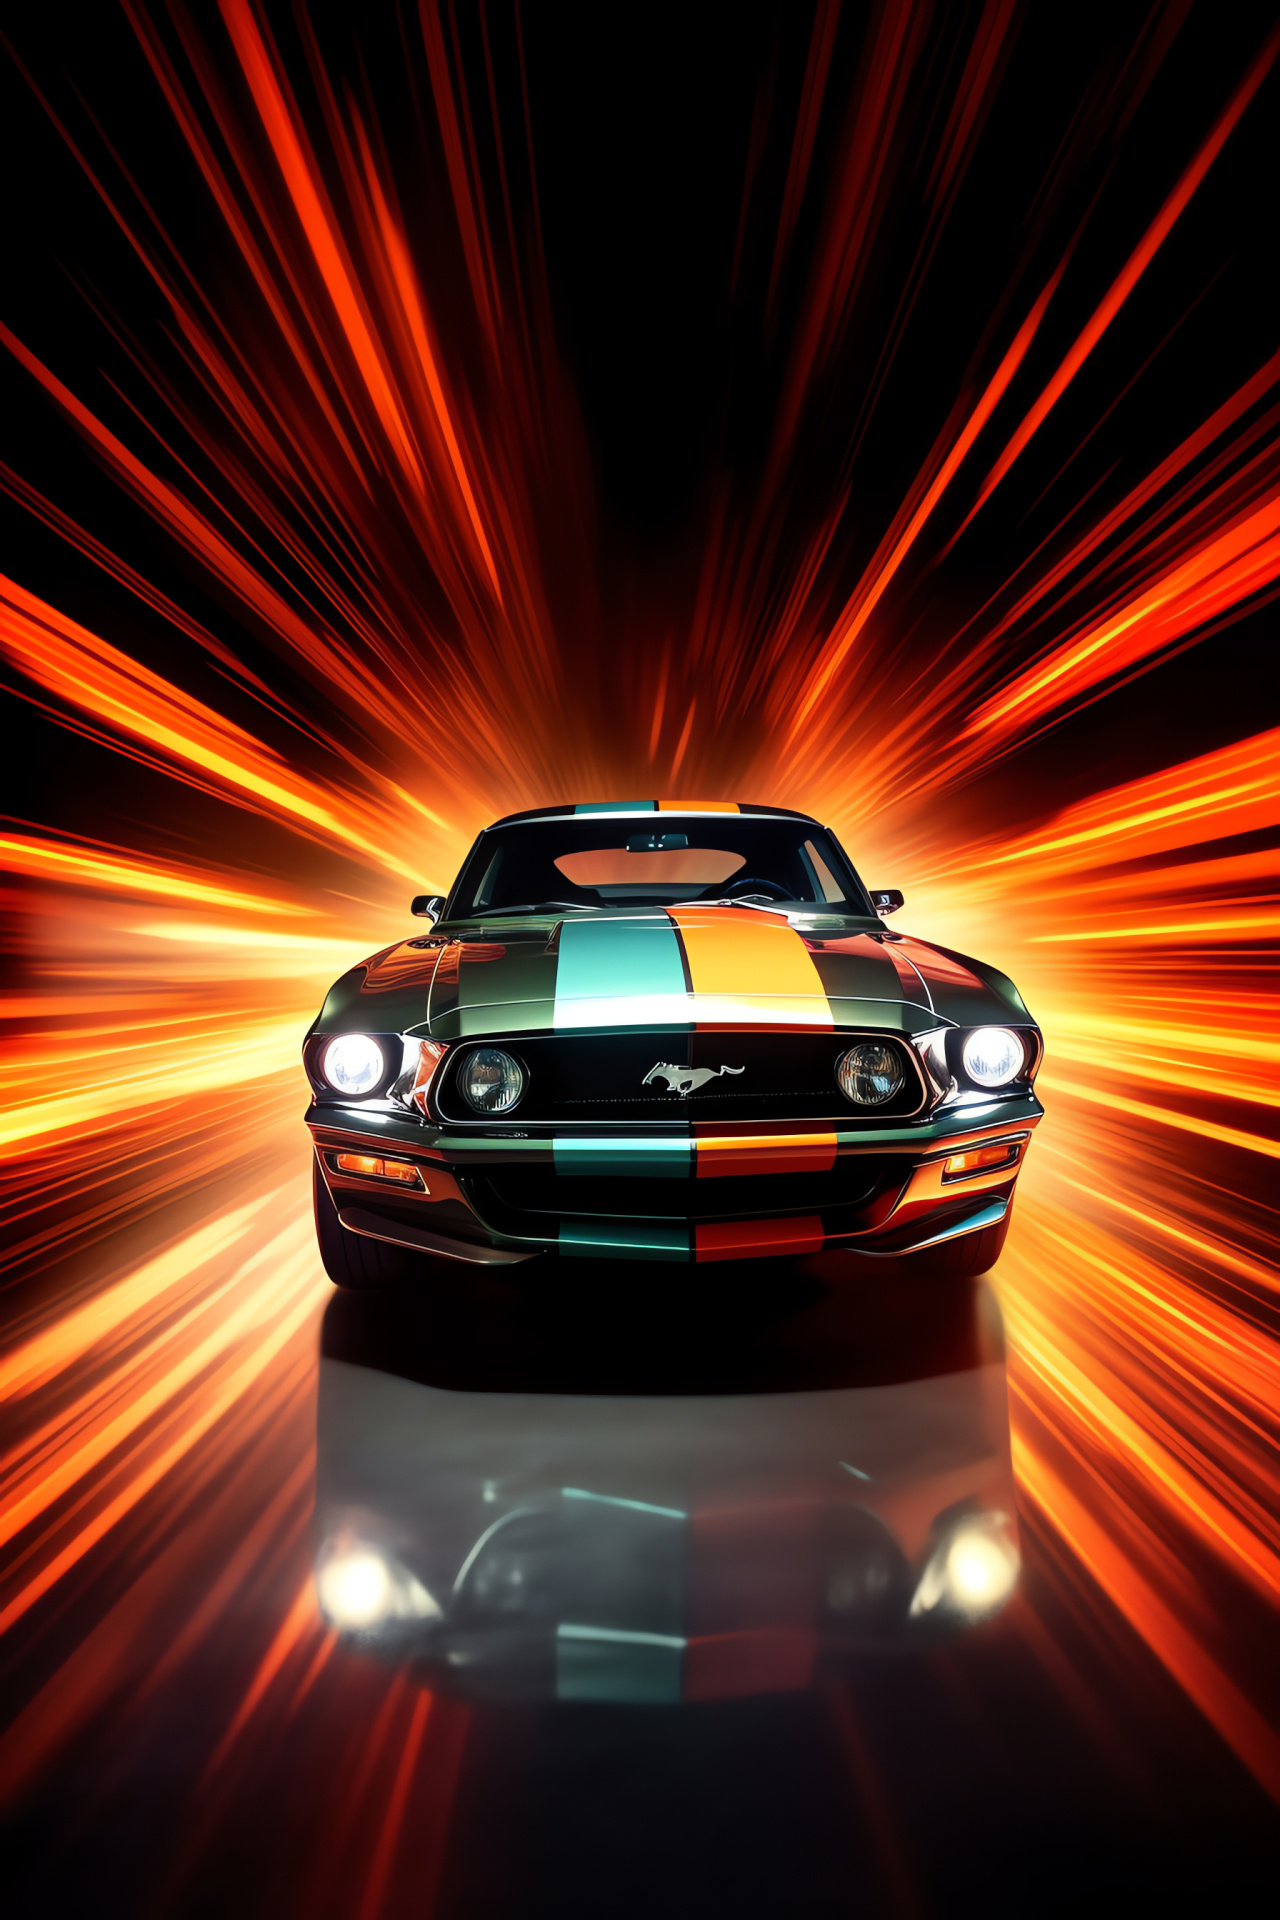 Mustang auto, Dynamic visuals, Artwork backdrop, Automotive photography, Performance vehicle, HD Phone Image